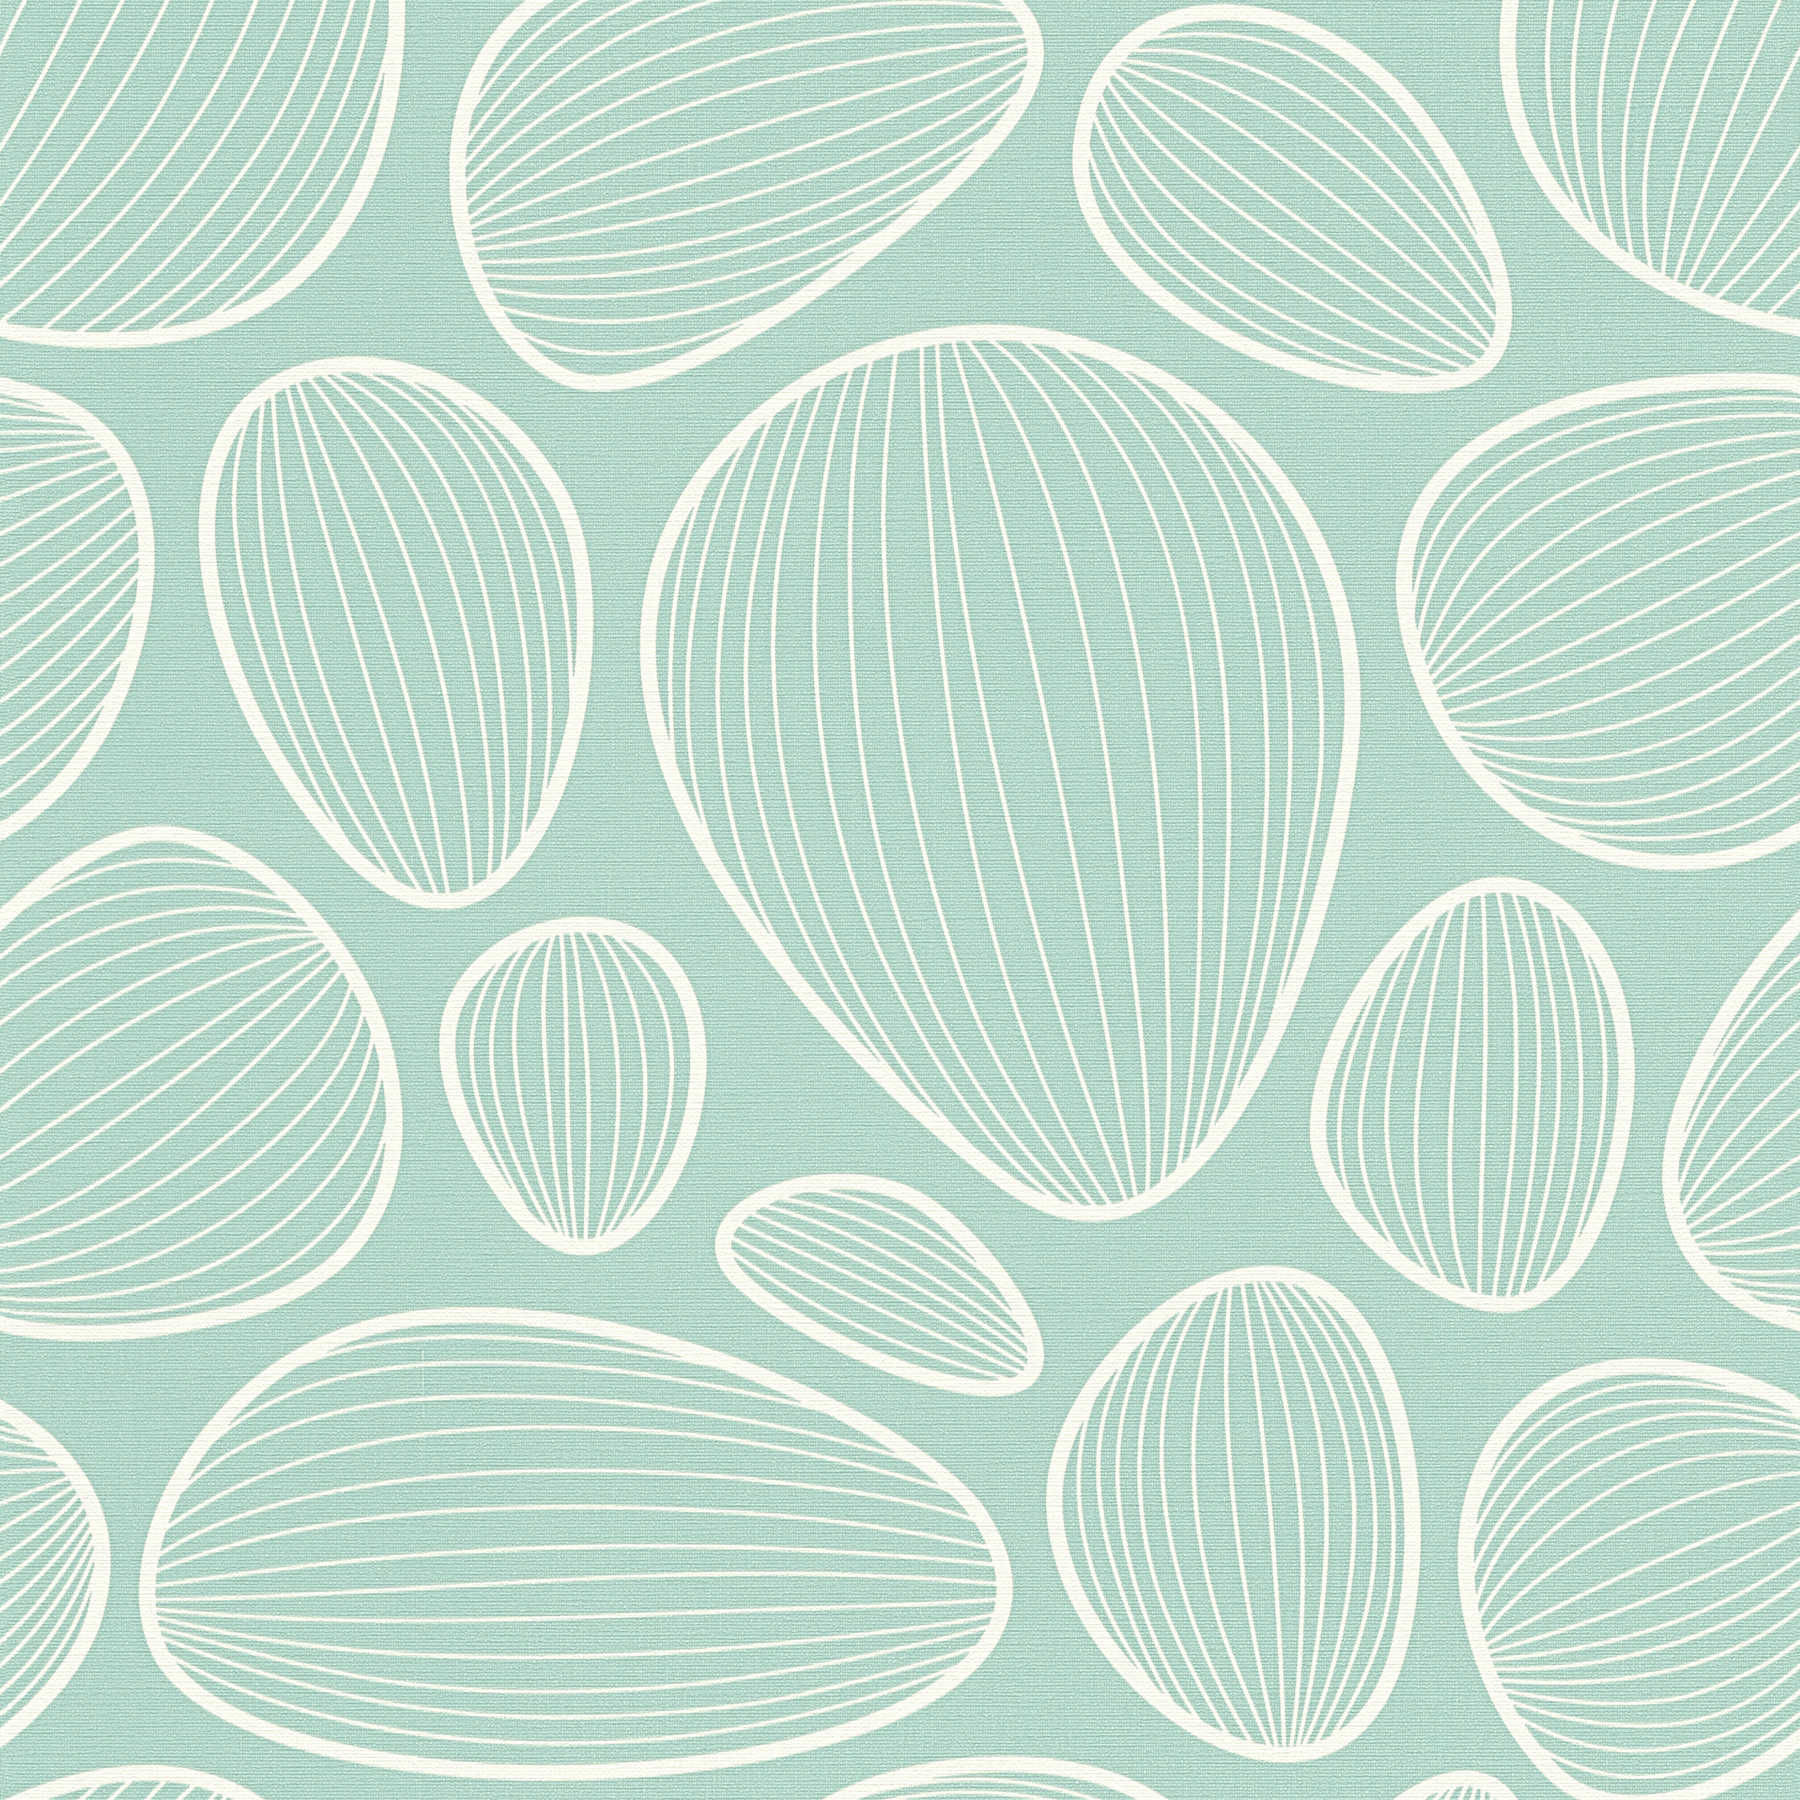         70s retro design wallpaper in mint green with textured pattern
    